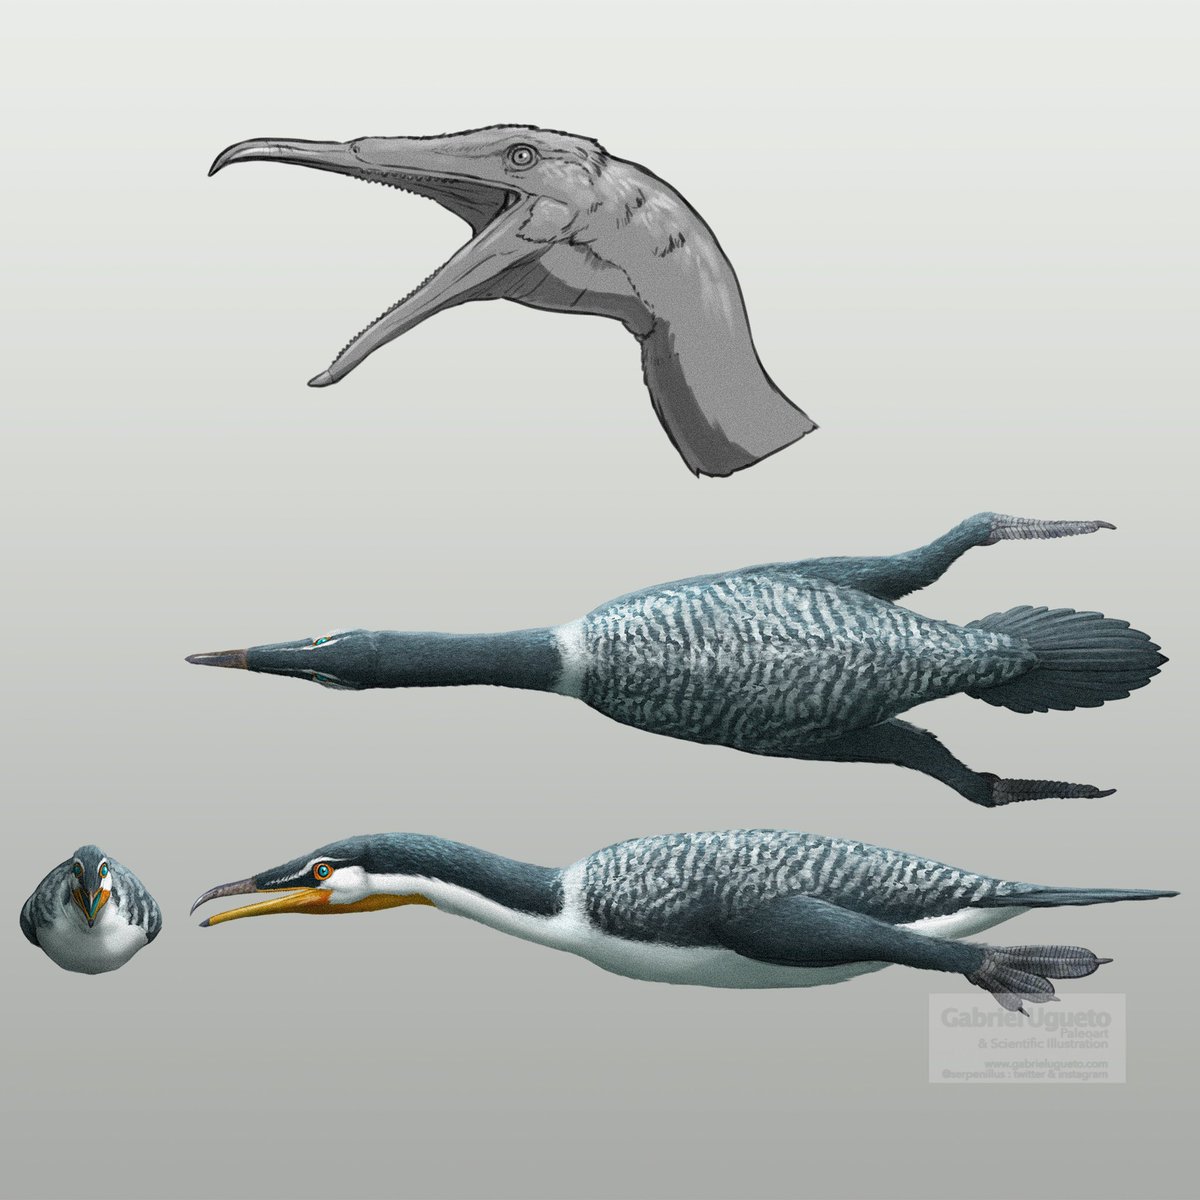 Ok, here it is! This is the concept design of Hesperornis I did for Prehistoric Planet 2